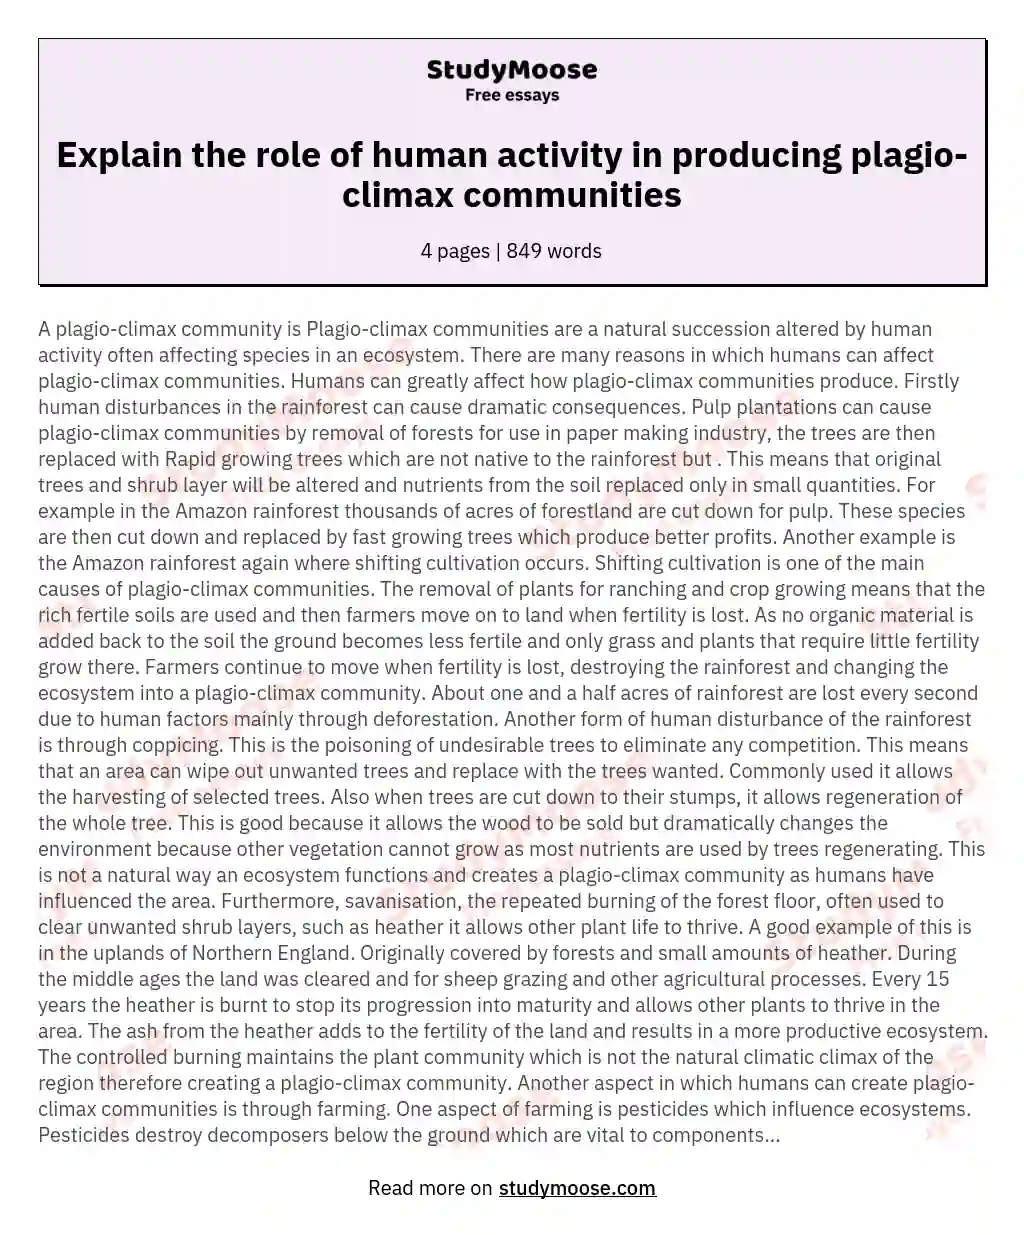 Explain the role of human activity in producing plagio-climax communities essay